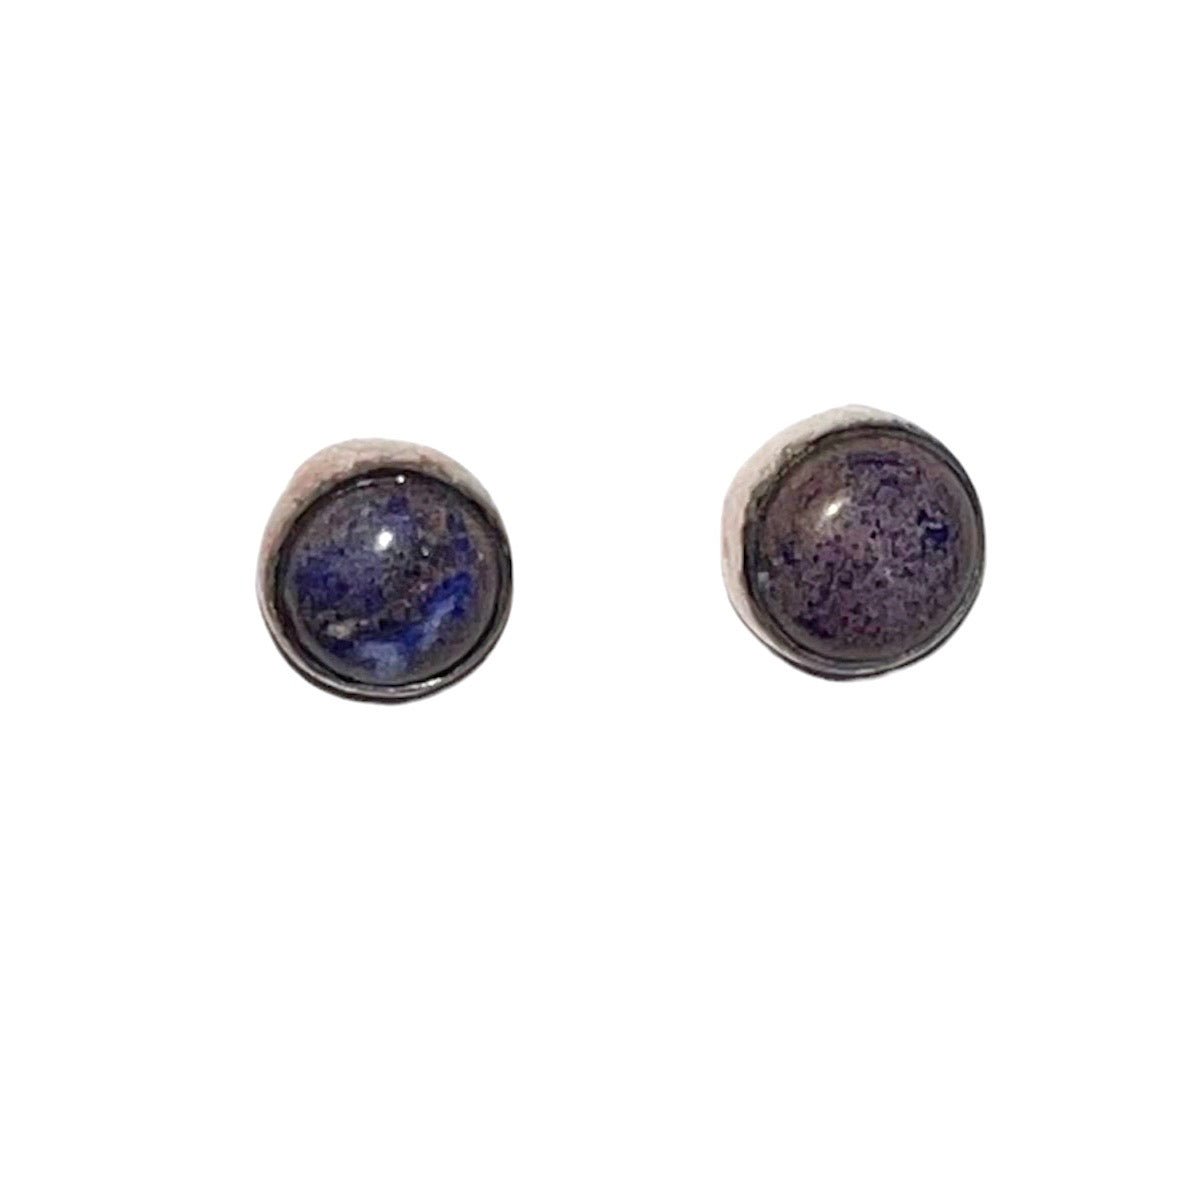 Earrings - Round Studs With Stones - Gift & Gather